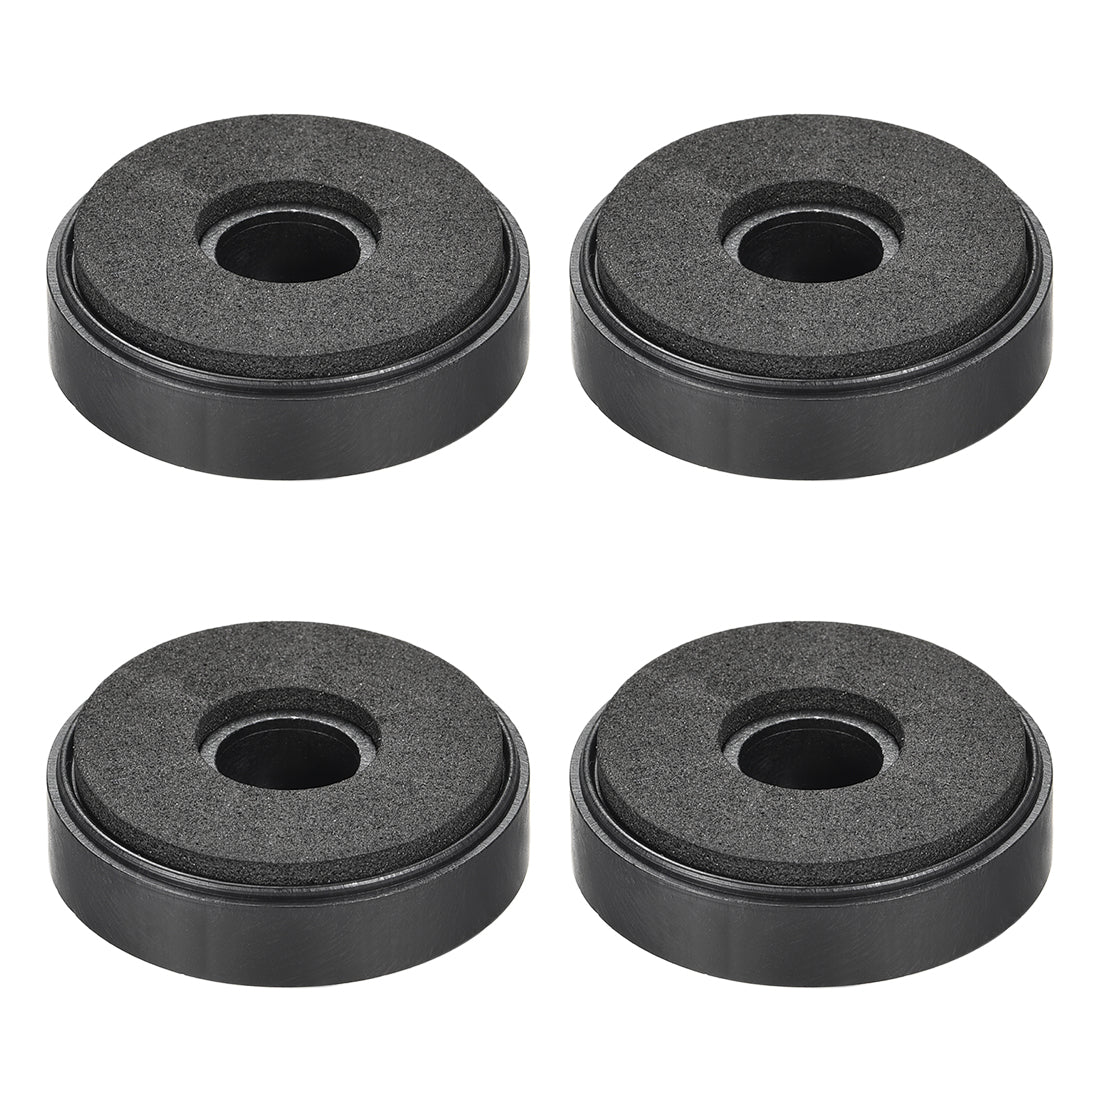 uxcell Uxcell 4 Pcs D30xH8mm Plastic Feet Anti-Vibration Base Pad Stand for Speaker Guitar Amplifier HiFi Black